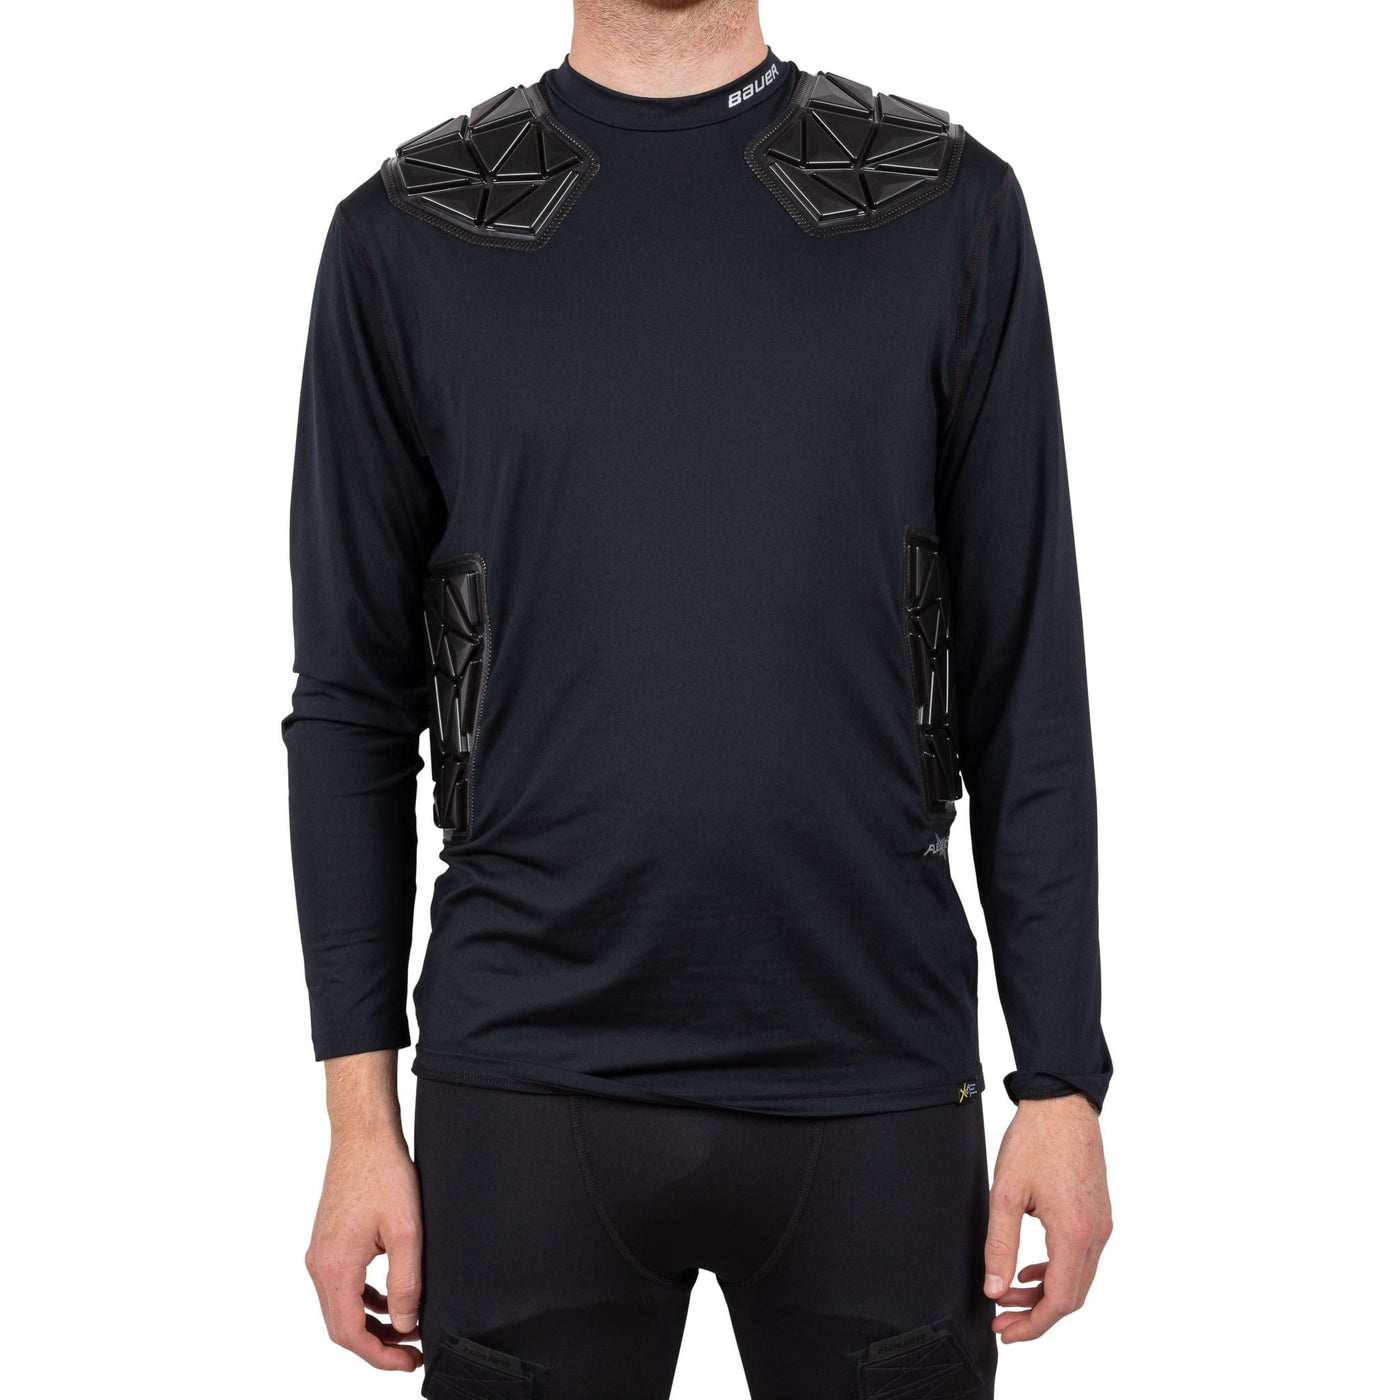 BAUER Elite Padded Neck Protect Long Sleeve Top-Sr